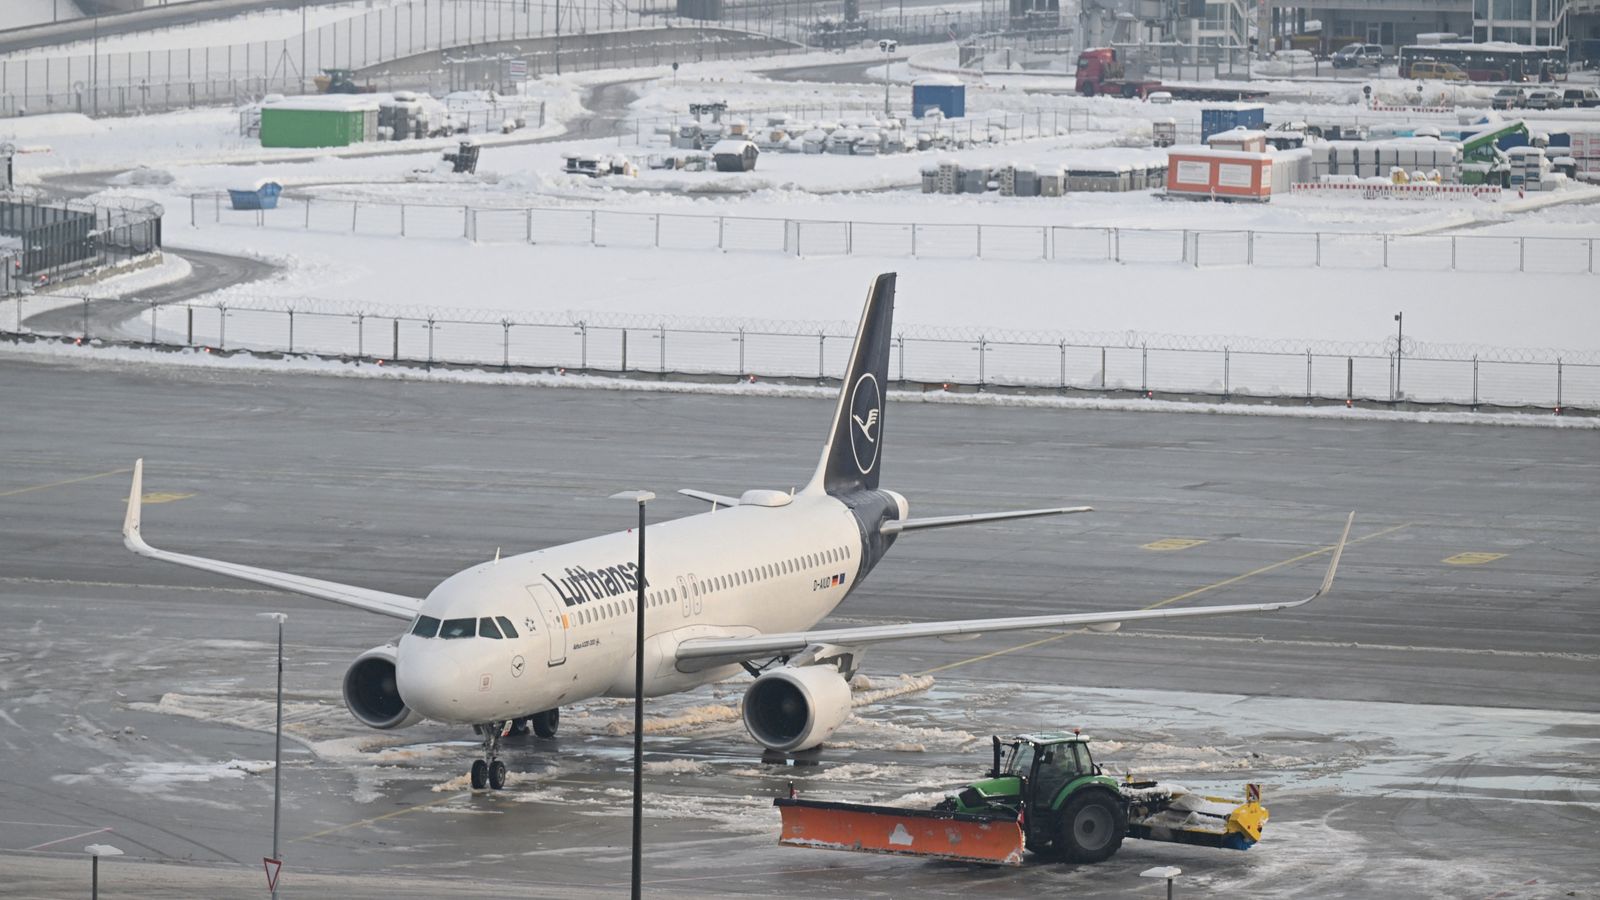 Munich Airport forced to close after freezing rain and wintry weather hits Germany